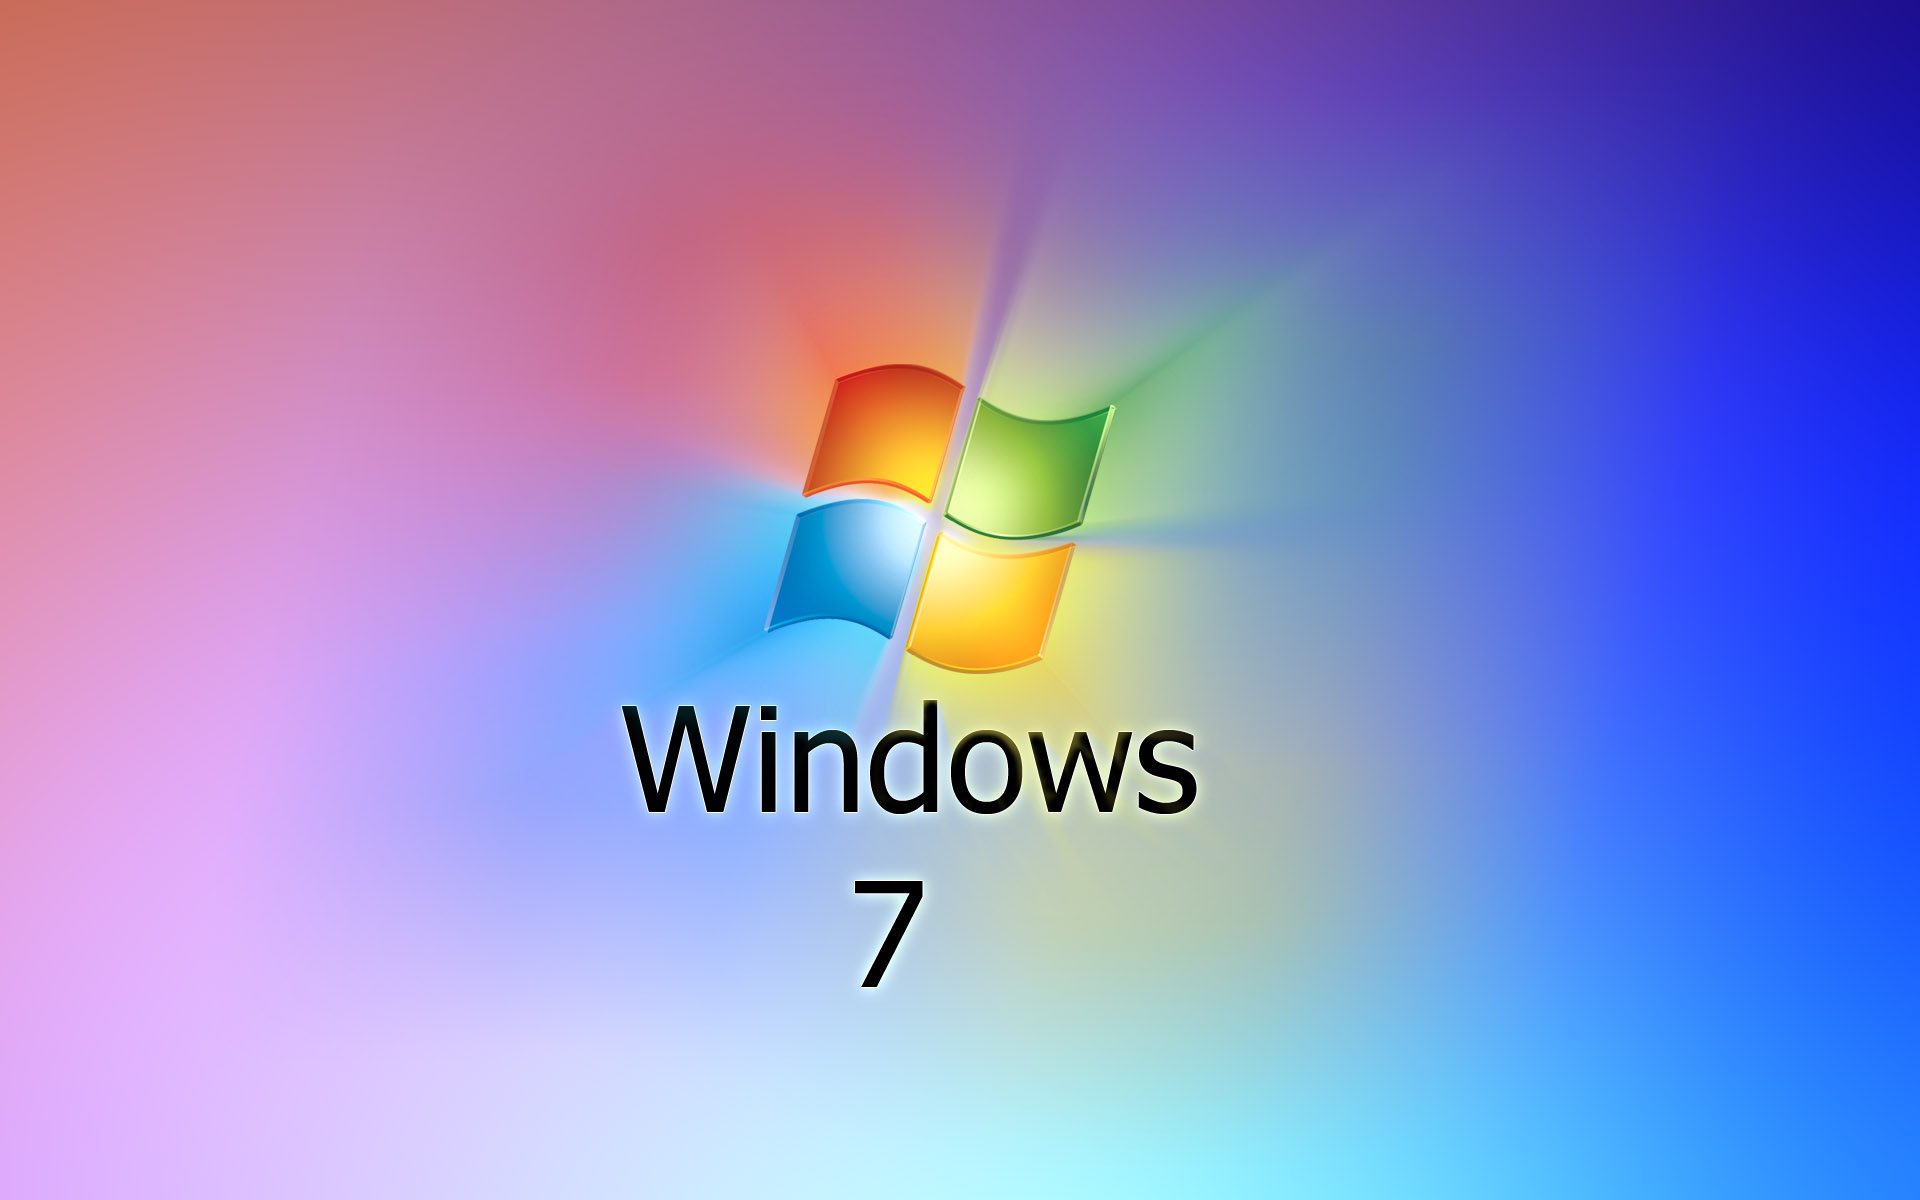 photos windows 7 pictures windows 7 pictures windows 7 pictures 1920x1200